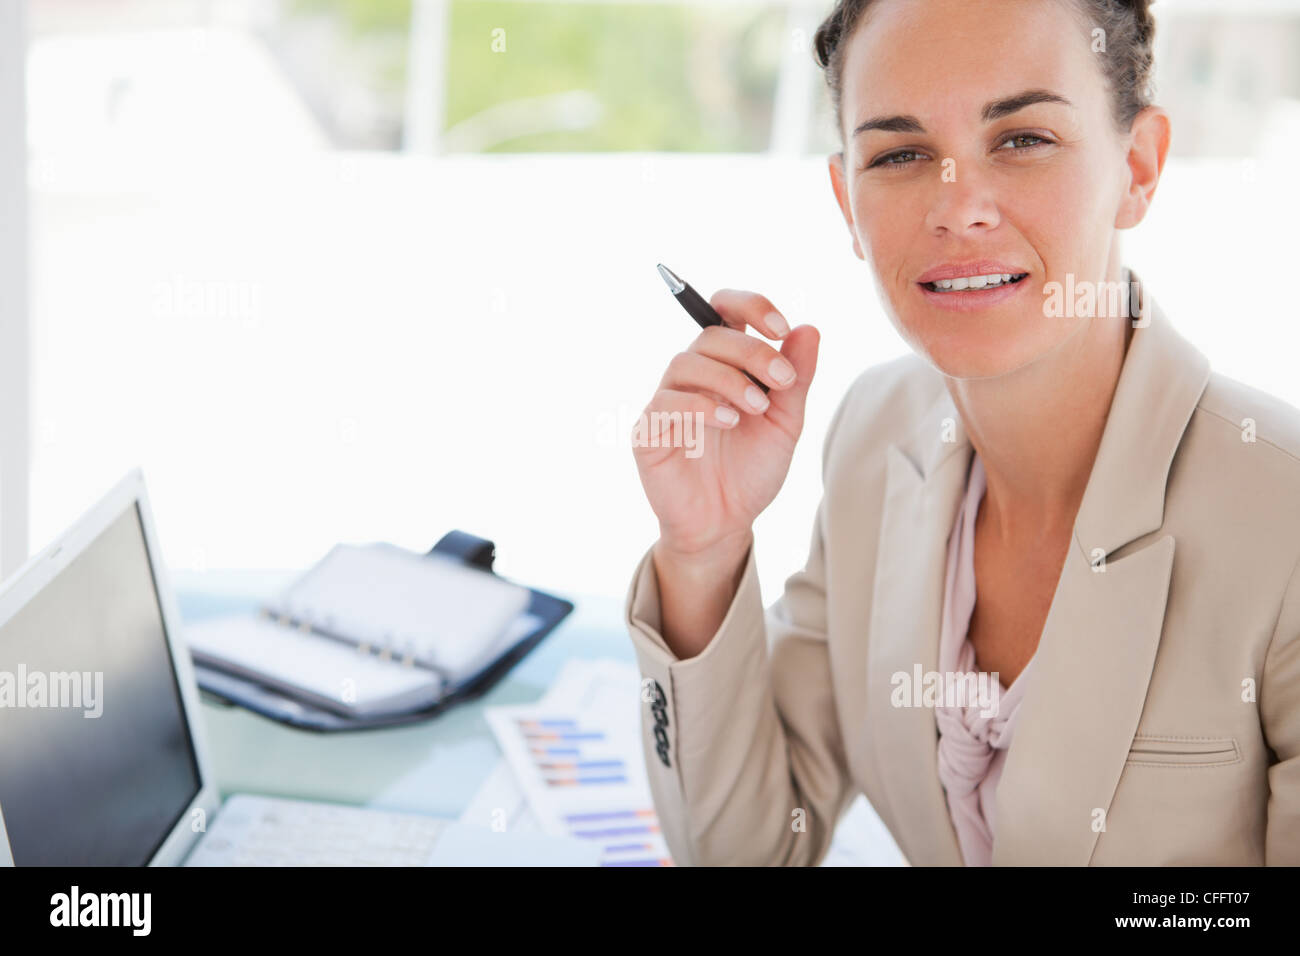 Portrait of a businesswoman with a braid Stock Photo